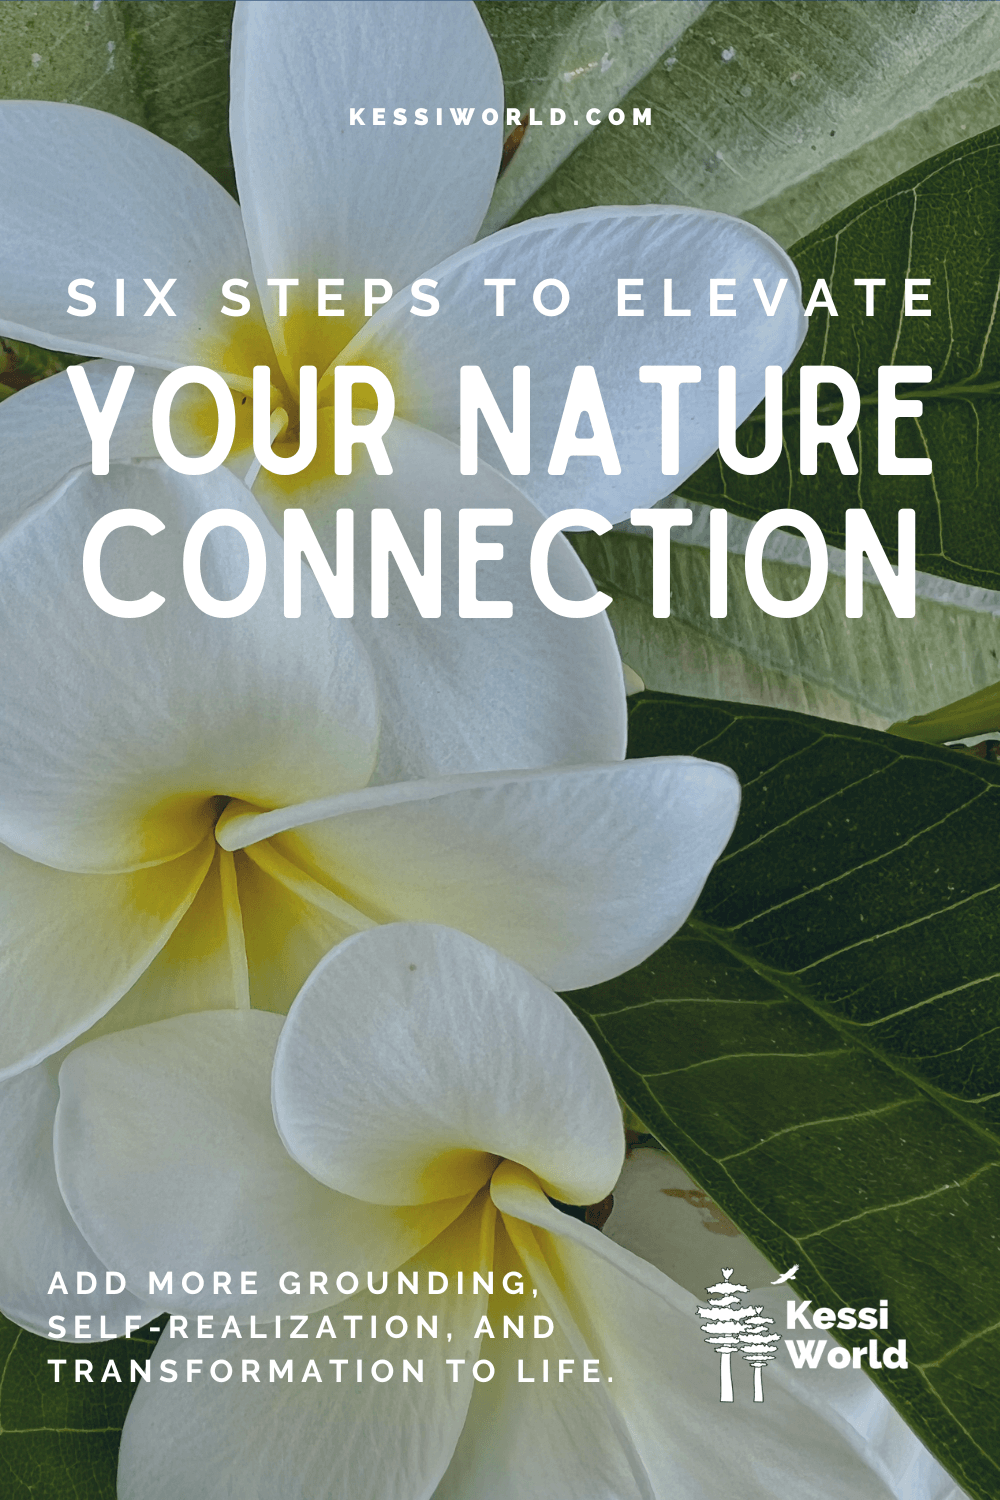 Pinterest pin shows plumeria flowers of white and yellow with green leaves and says six steps to elevate your nature connection.